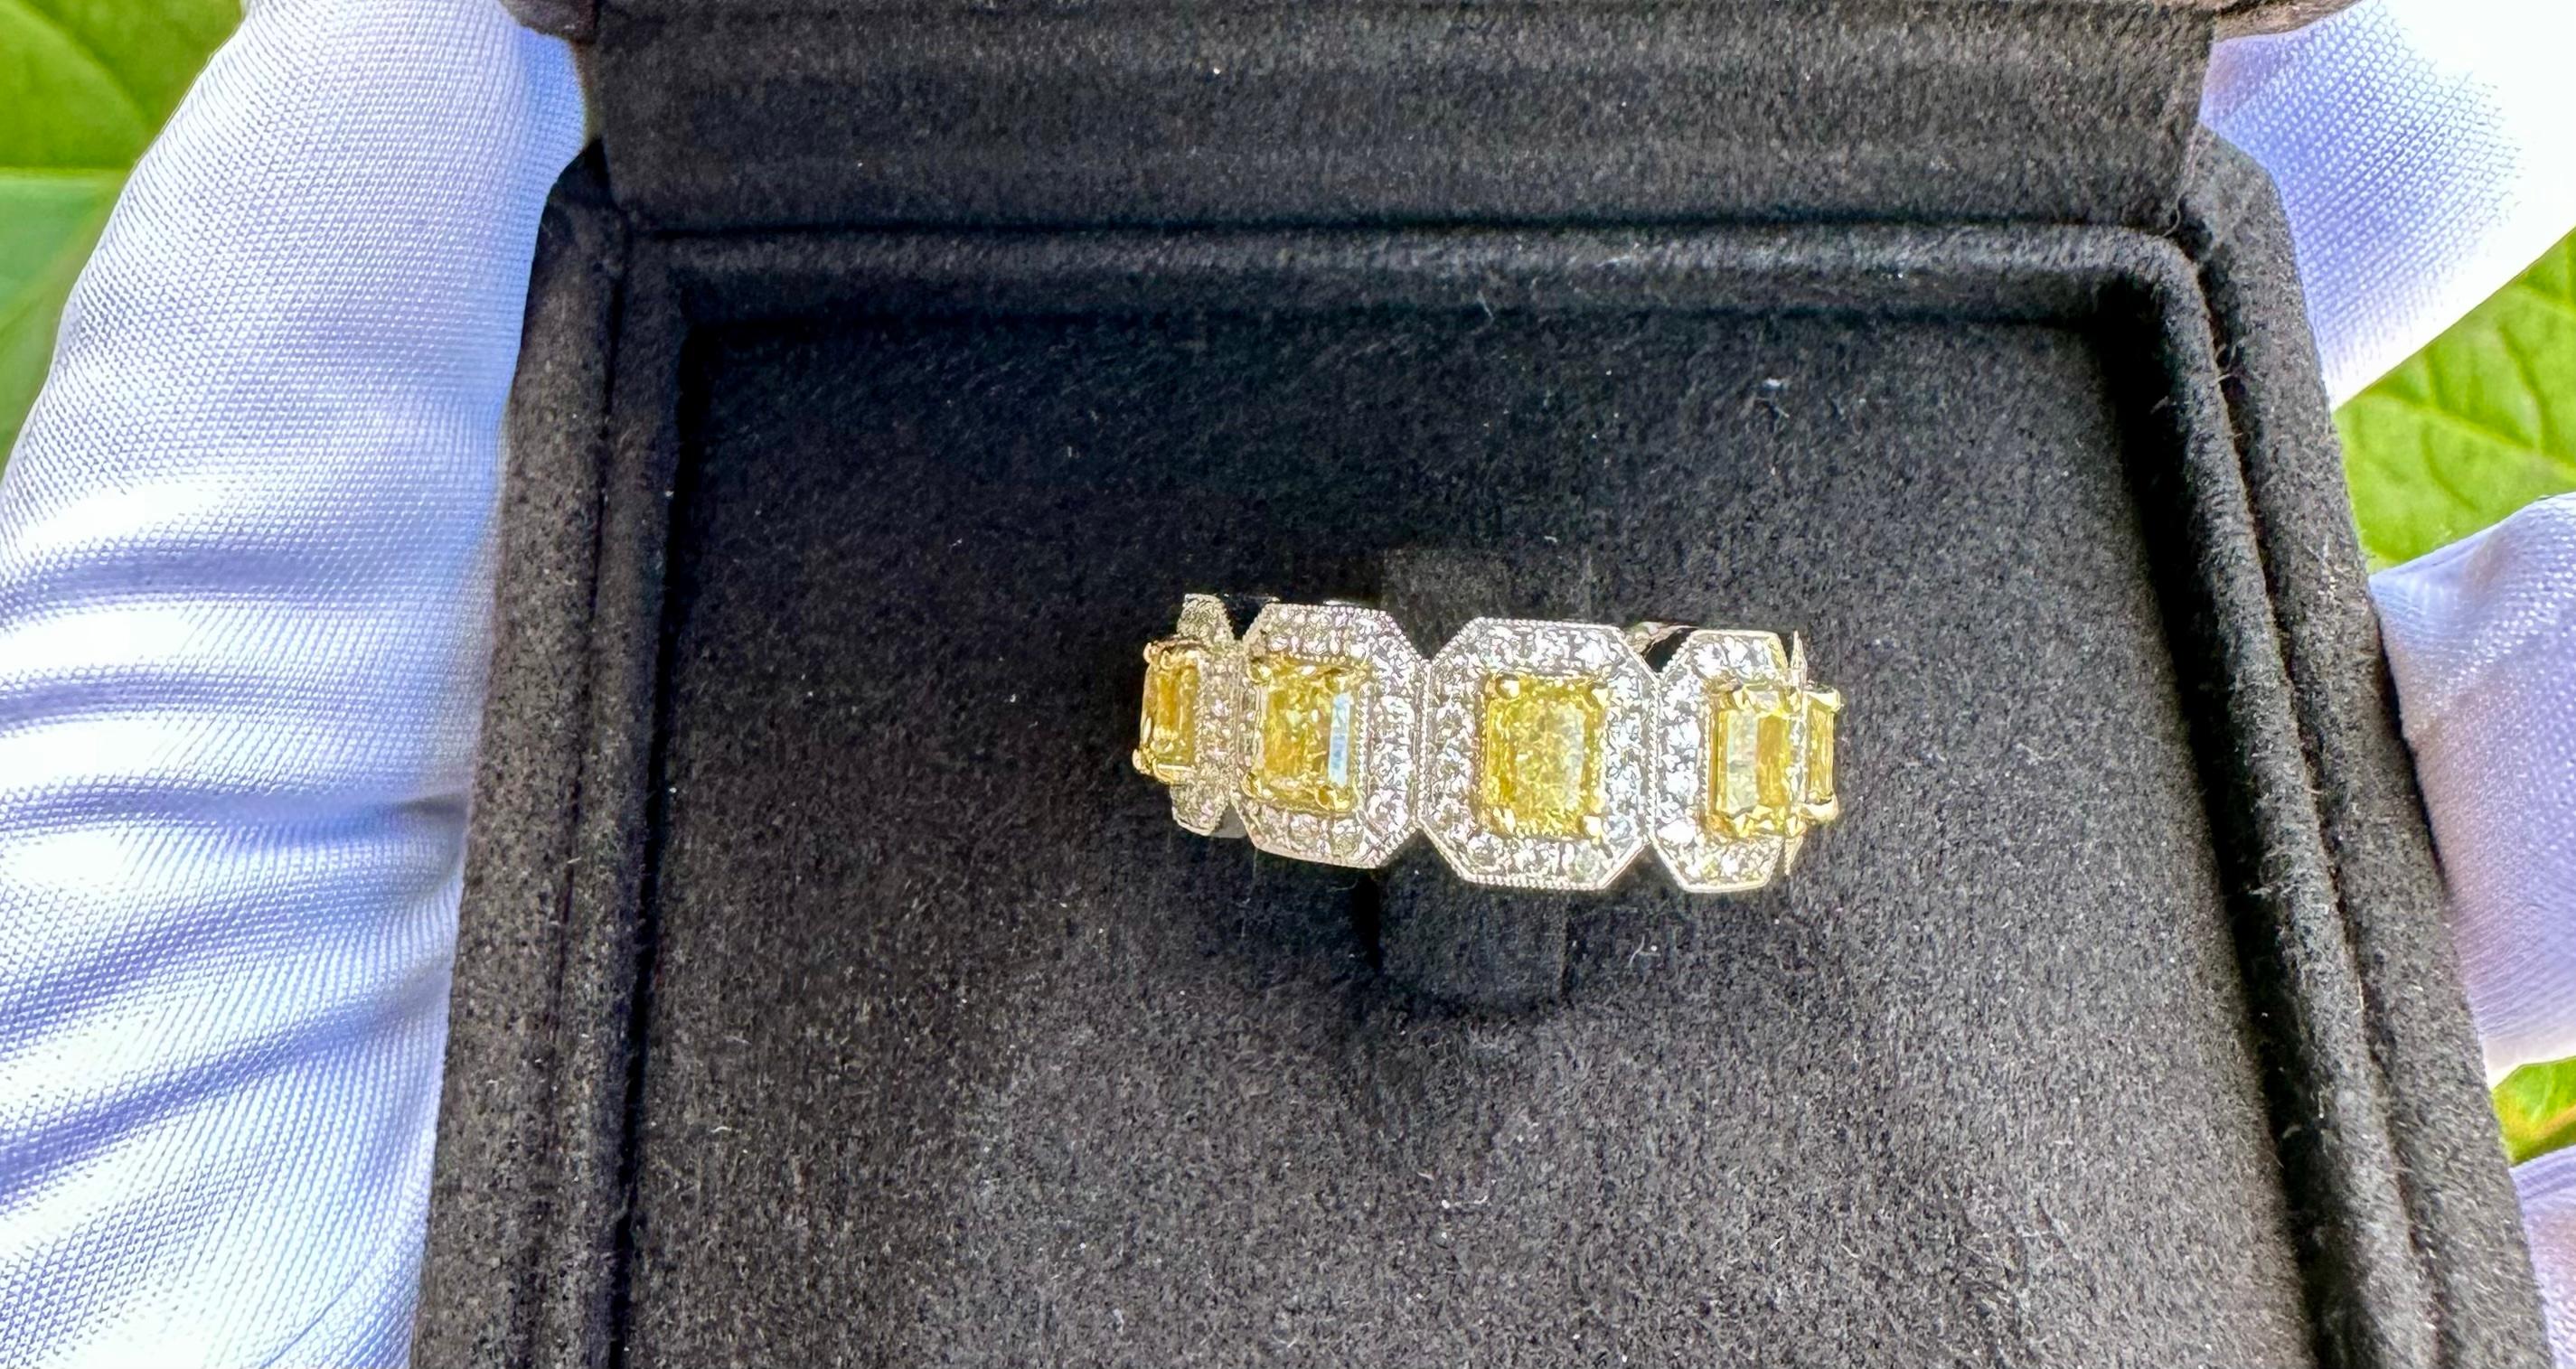 Very striking, ladies 18 karat white and yellow gold custom made 5.26 carat estate eternity band adorned with 9 radiant cut fancy yellow solitaire diamonds, prong set and surrounded by a halo of round brilliant white diamonds to further showcase